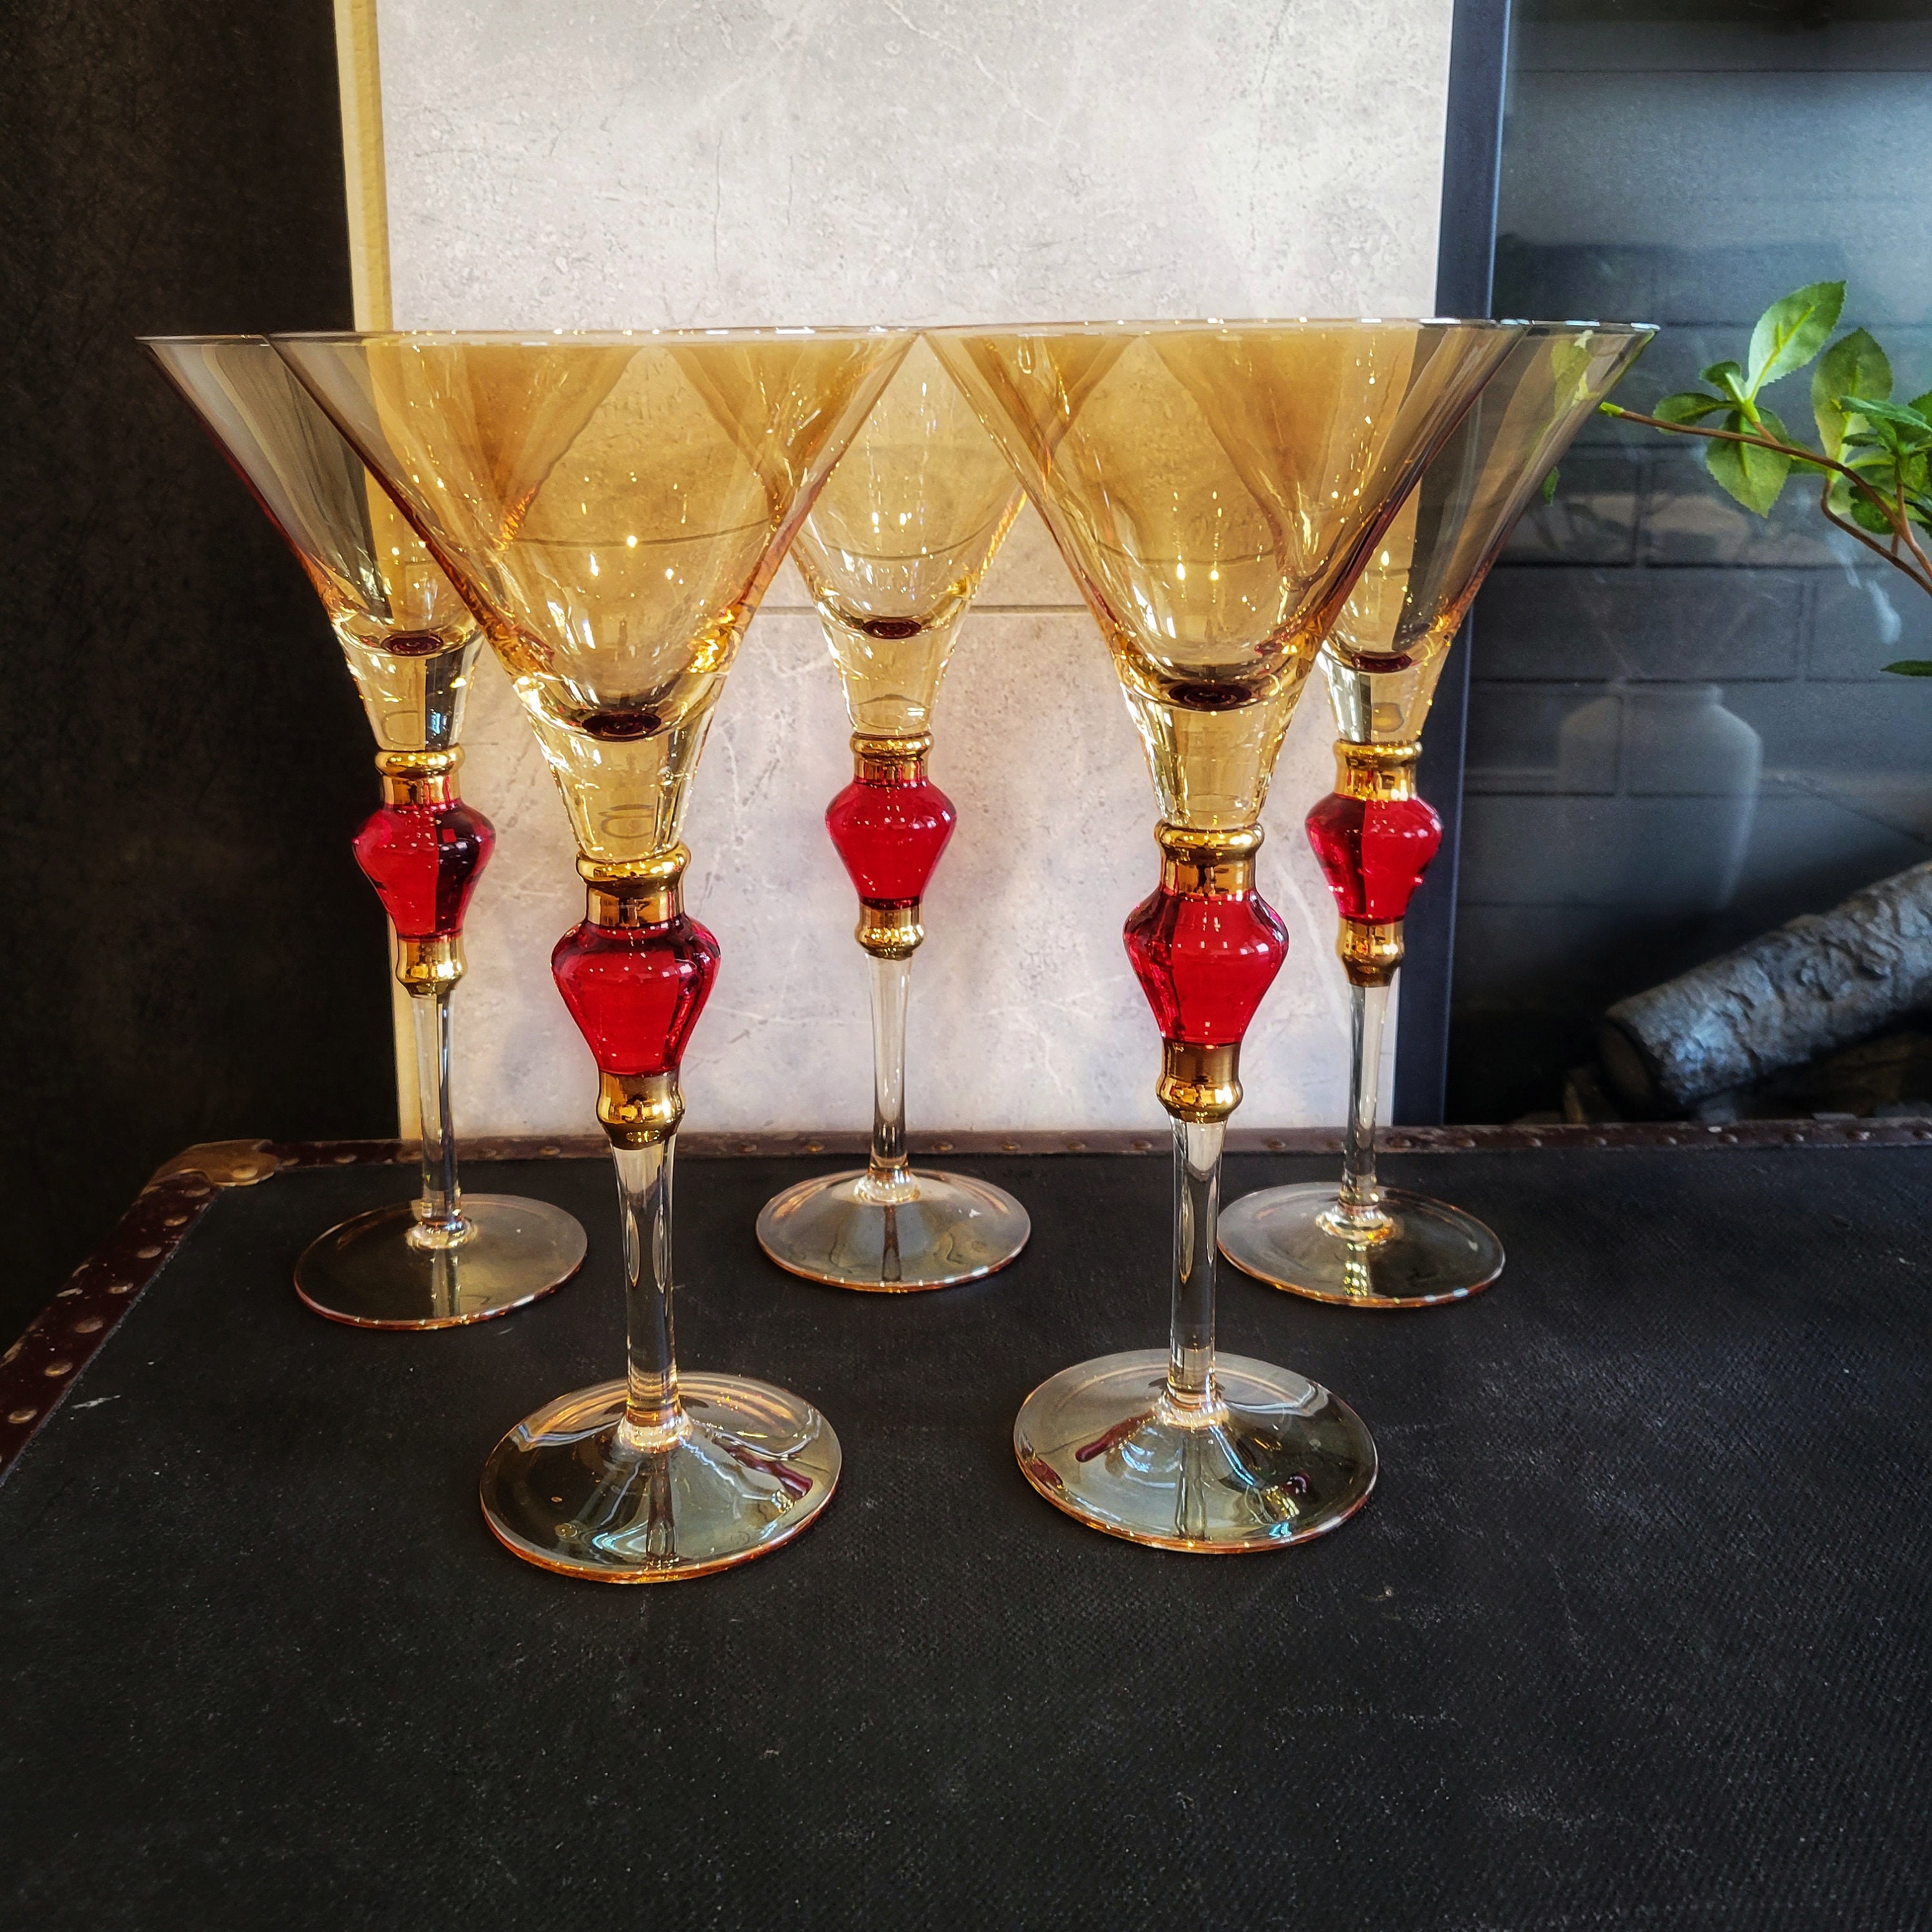 Two Pink Rose Champagne Flutes™ with Swarovski™ Crystals in the